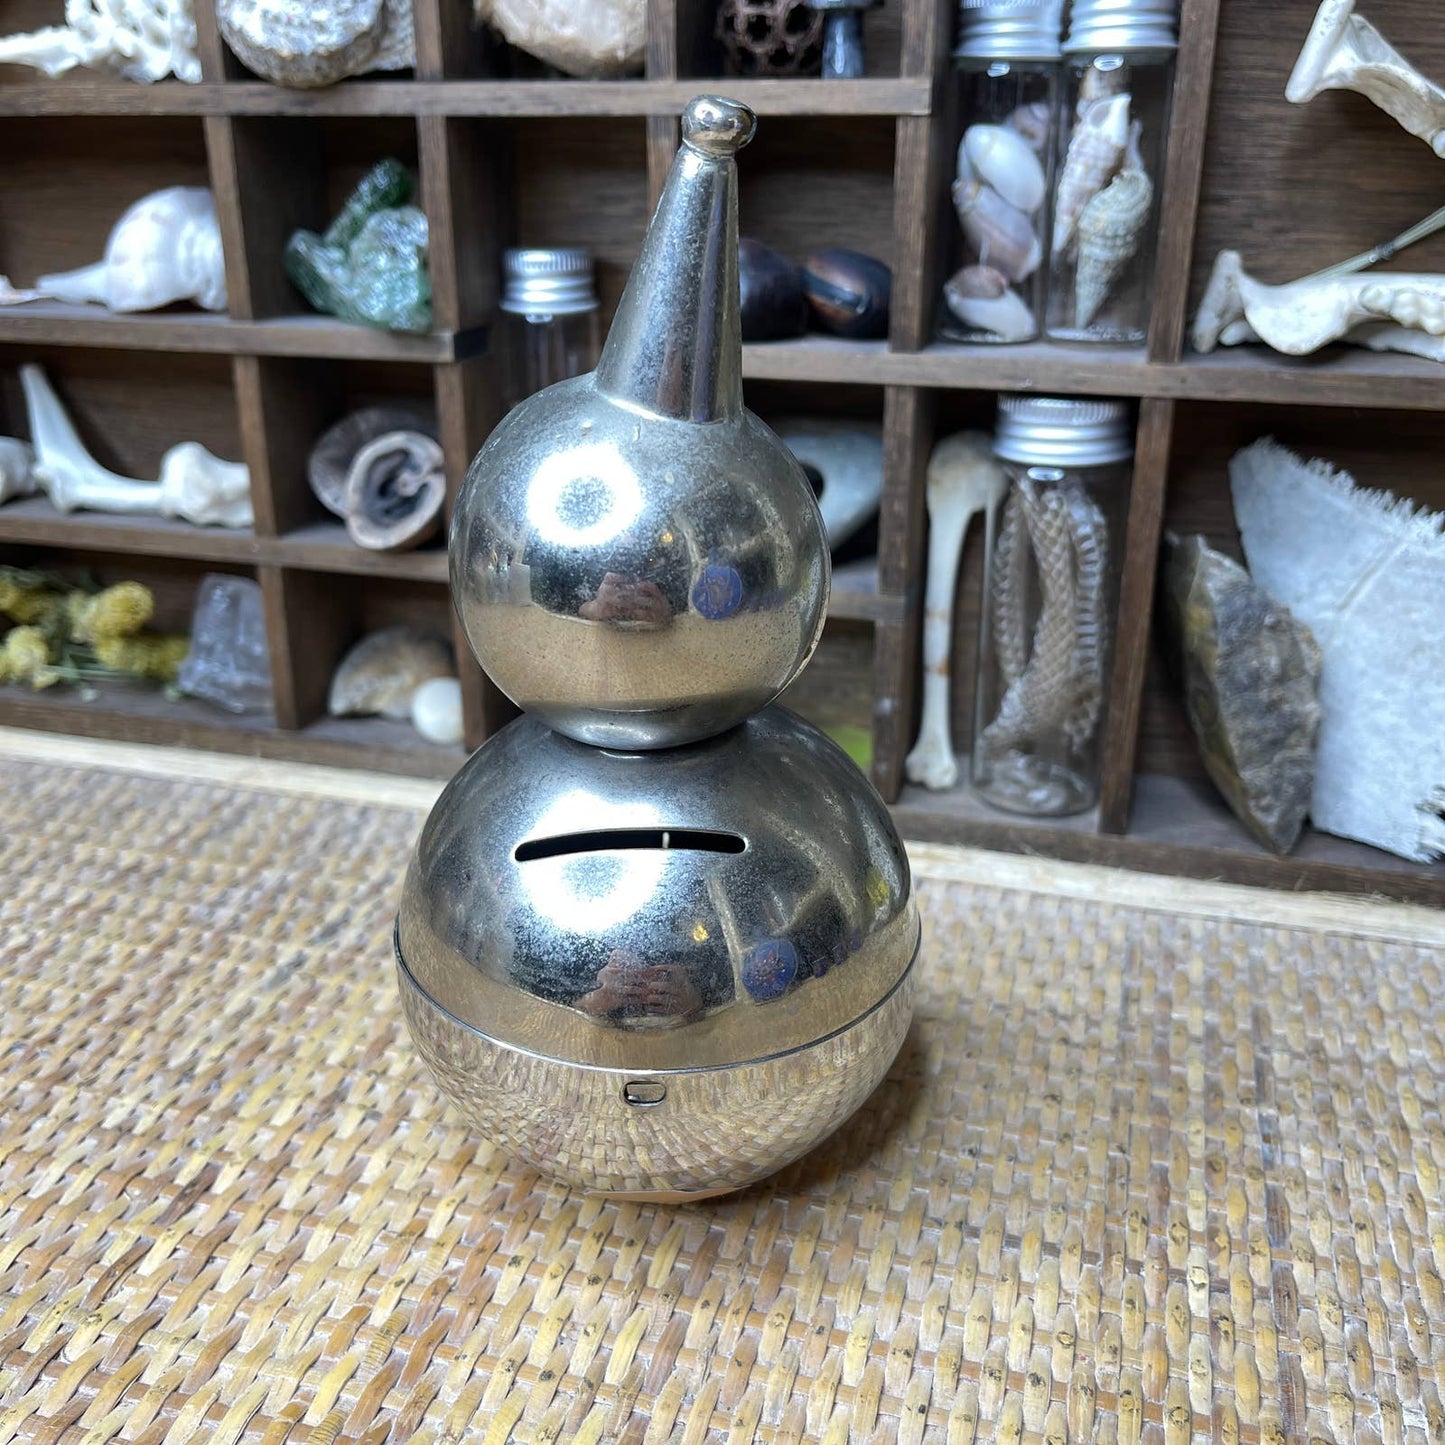 Vintage 60s Tipsy Clown Bank Silver Toned Metal with Weighted Bottom by Raimond